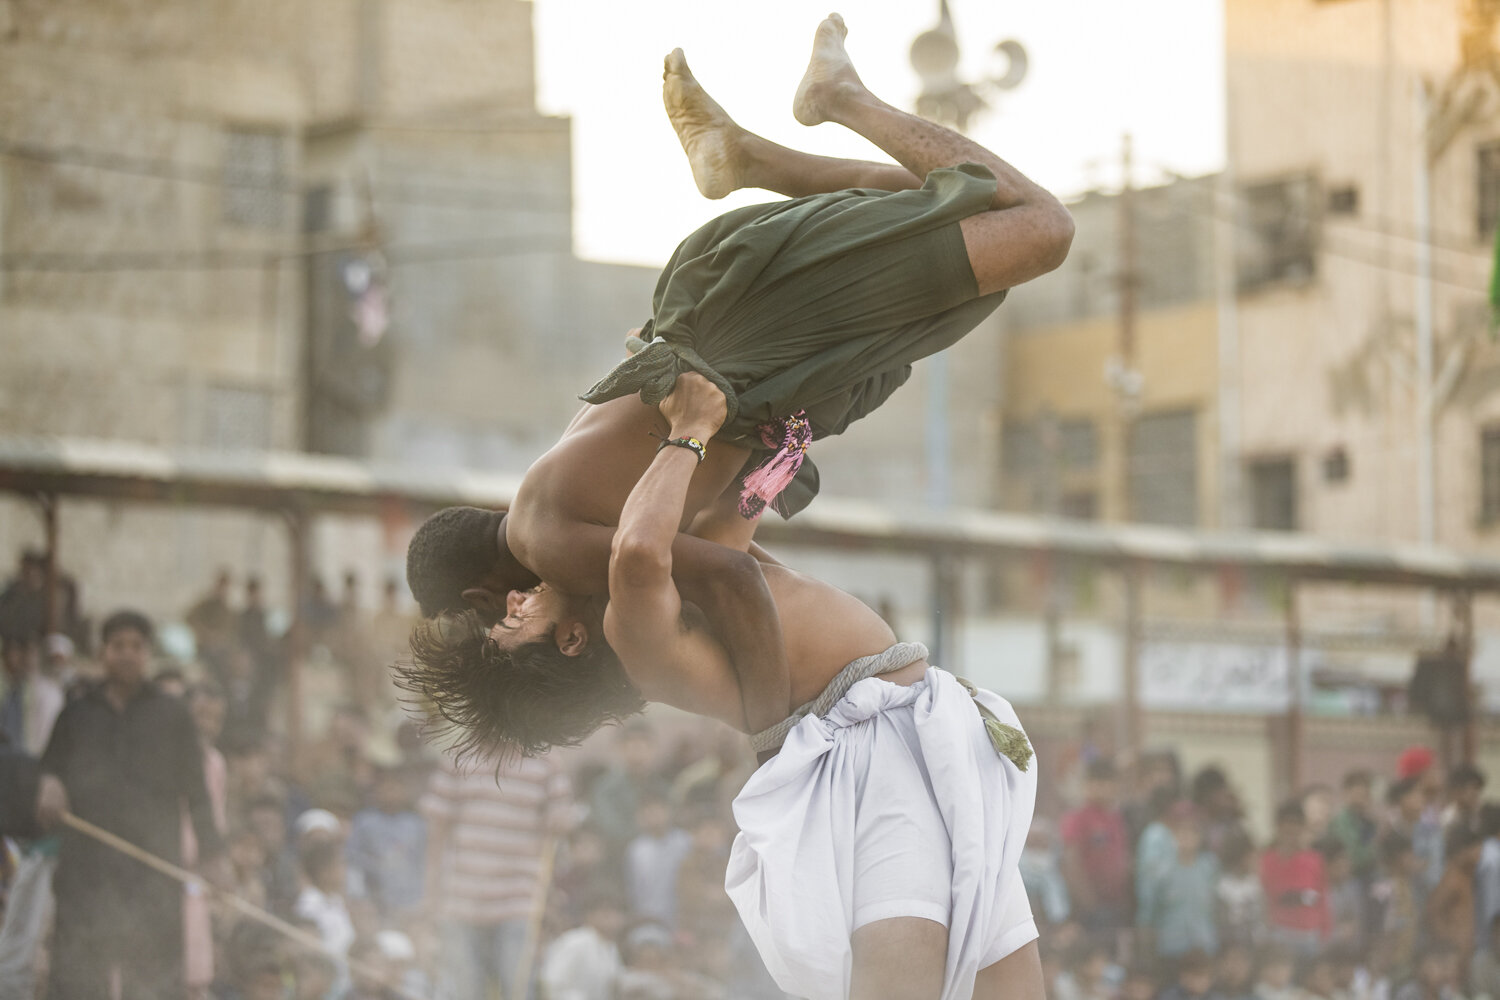  Malakhra ‘malhoos’ (wrestlers) grapple on the dirt grounds of Chanesar Blue Football Ground in Karachi, Pakistan on Dec 26, 2019. Malakhra is an age-old Sindhi wrestling sport practiced in Pakistan and India, dating back roughly 5000 years. Wrestler